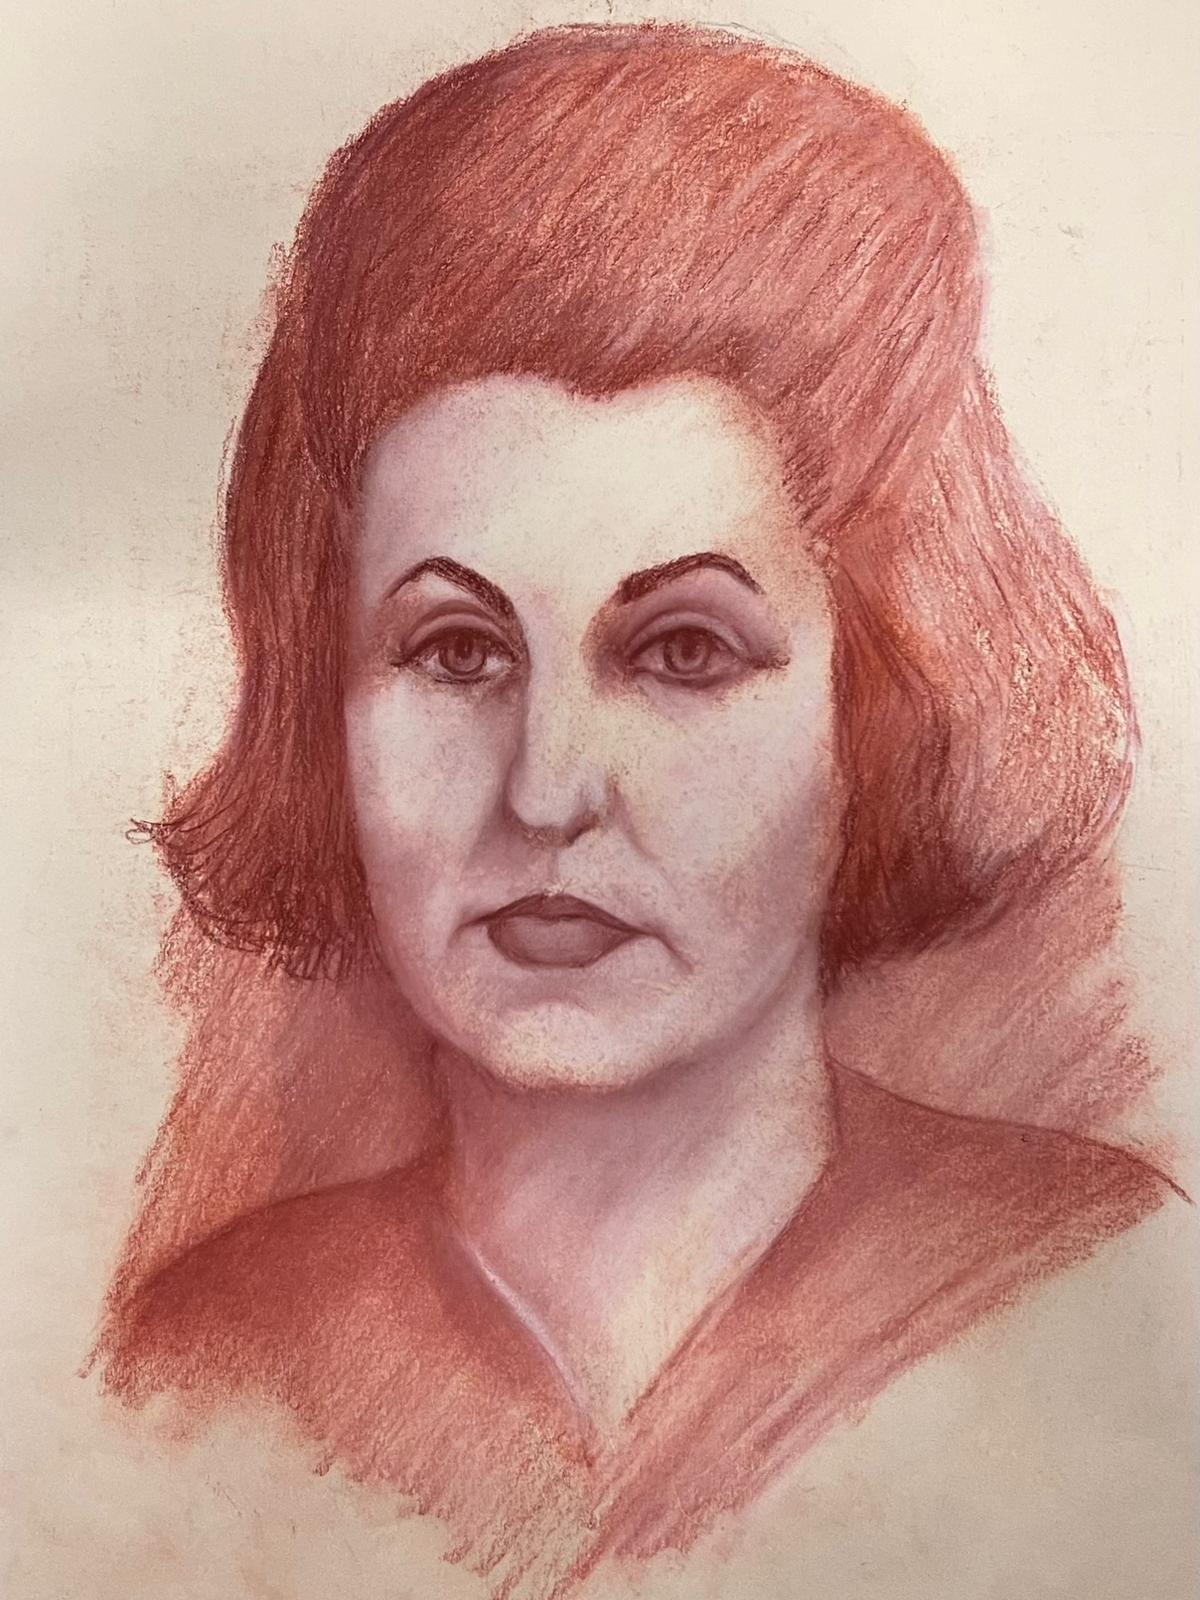 Pastel Portrait
by Guy Nicod
(French 1923 - 2021)
pastel on artist paper, unframed
painting : 20 x 15.5 inches
provenance: artists estate, France
condition: very good and sound condition